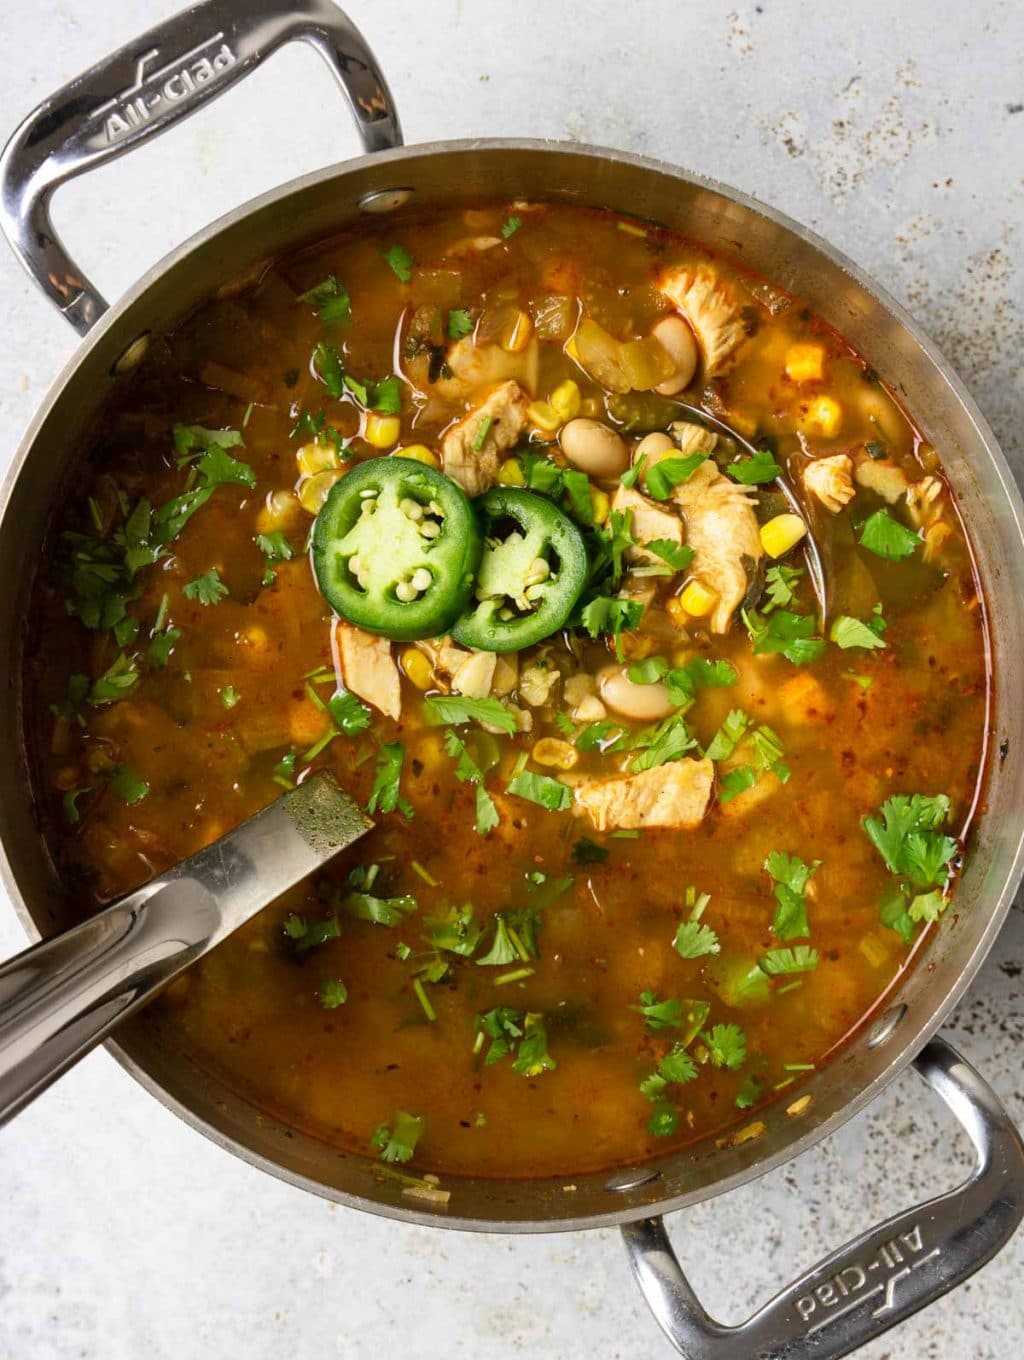 Chicken chili in a large pot with a ladle and garnished with fresh jalapeno and cilantro